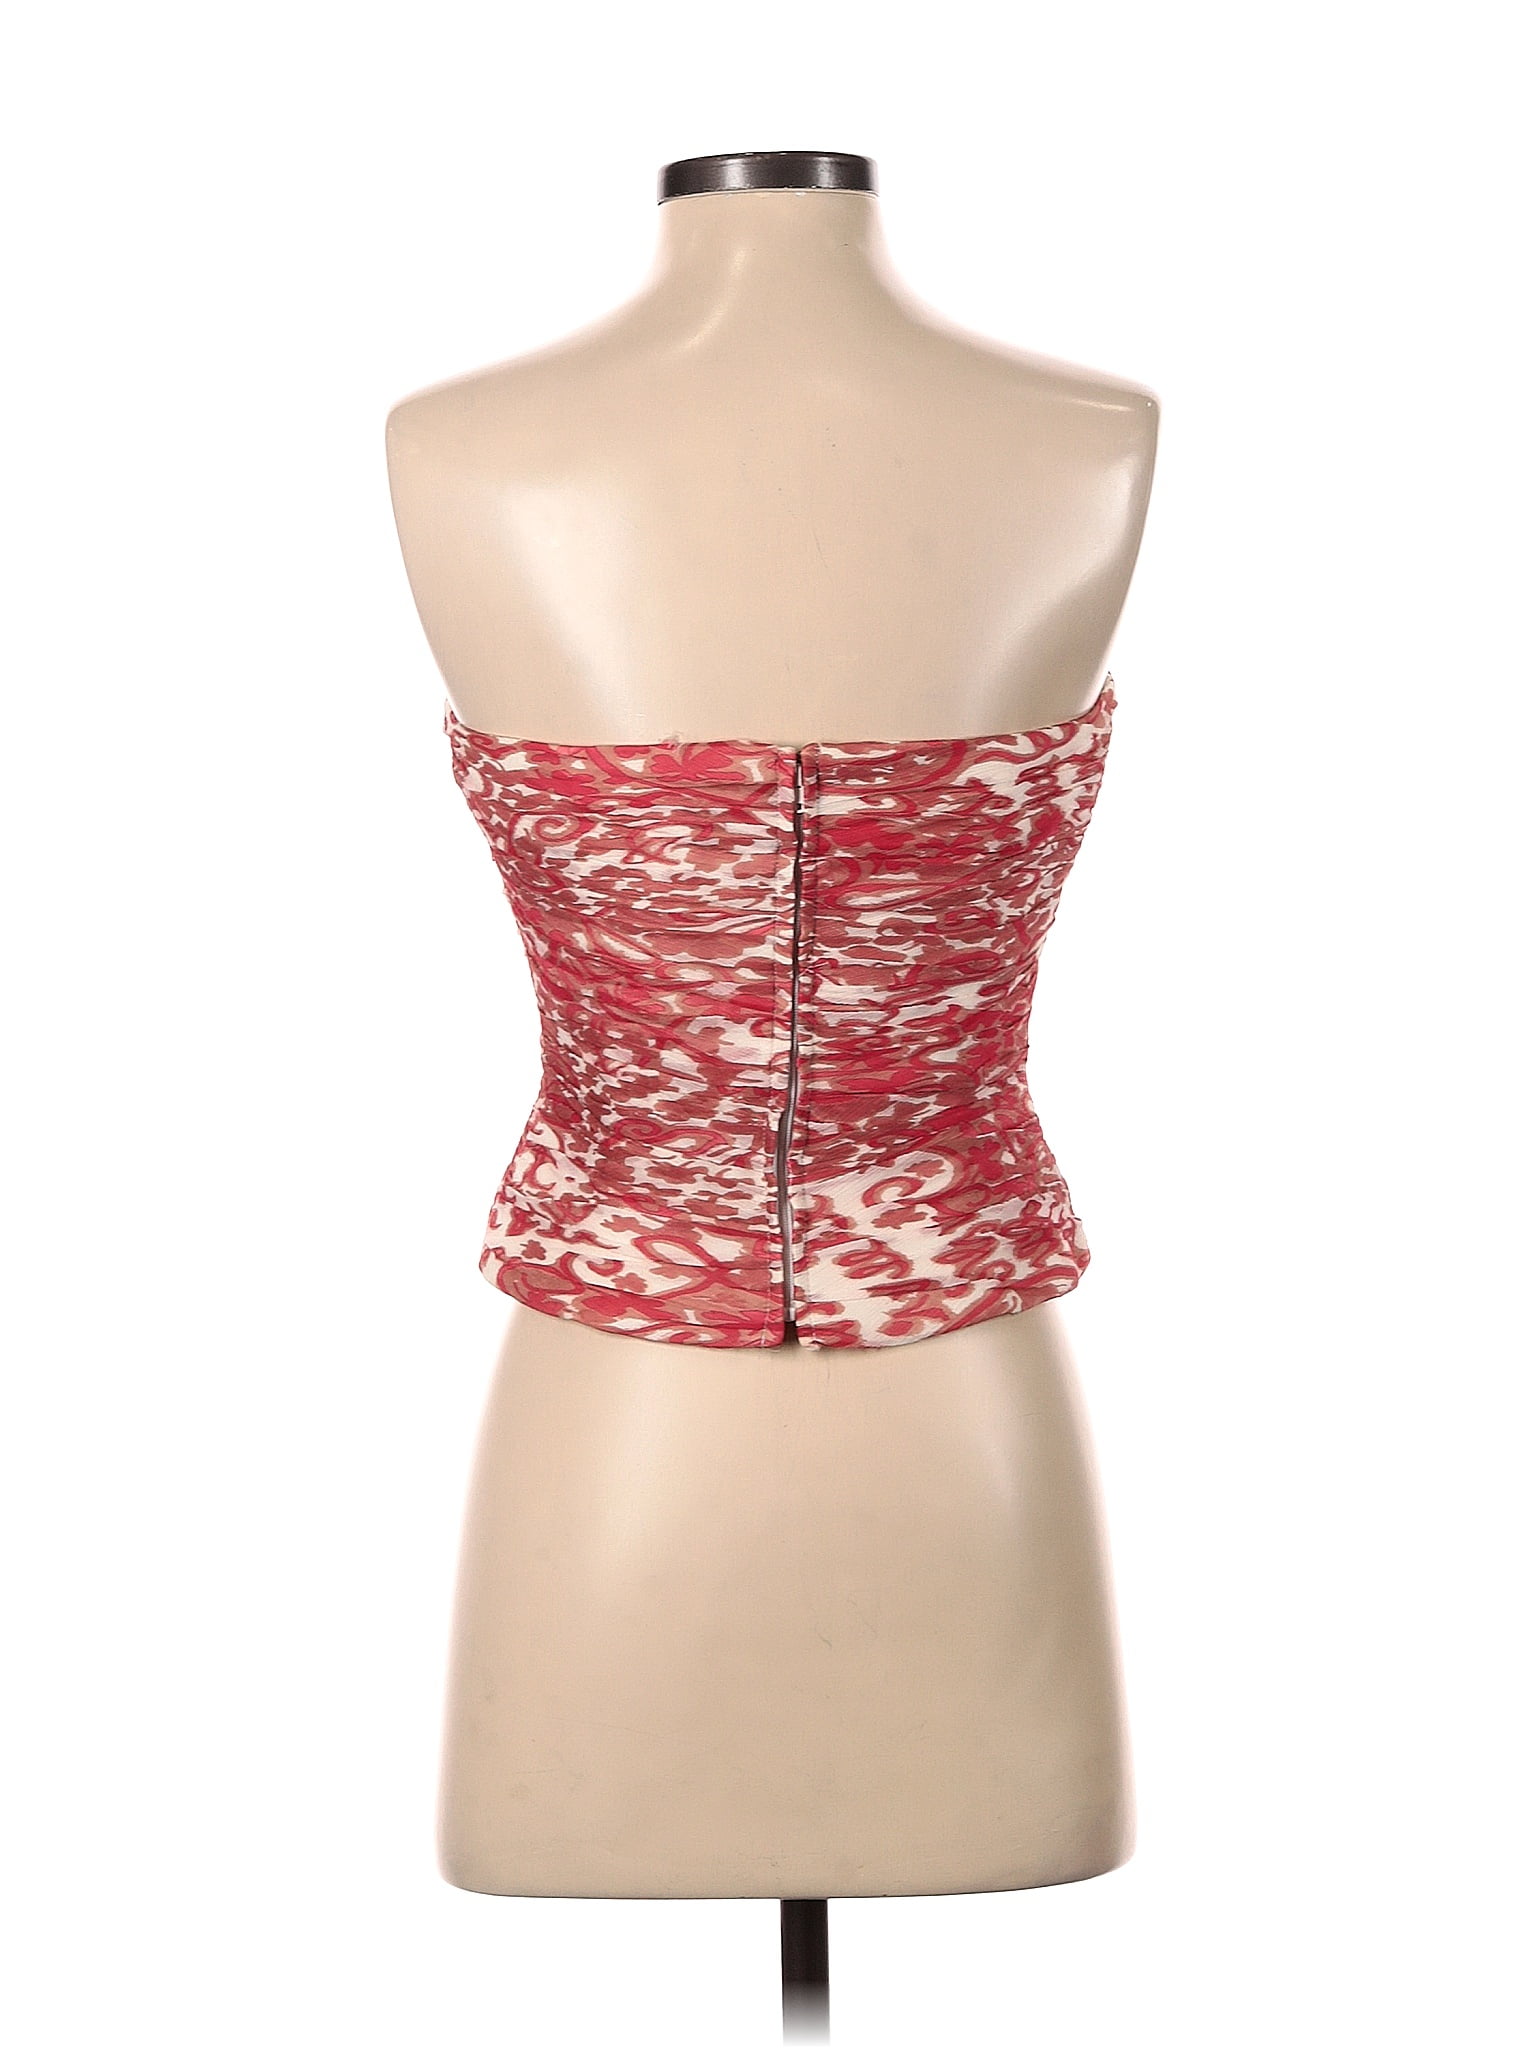 Floral Corset , -Brand is White House Black Market